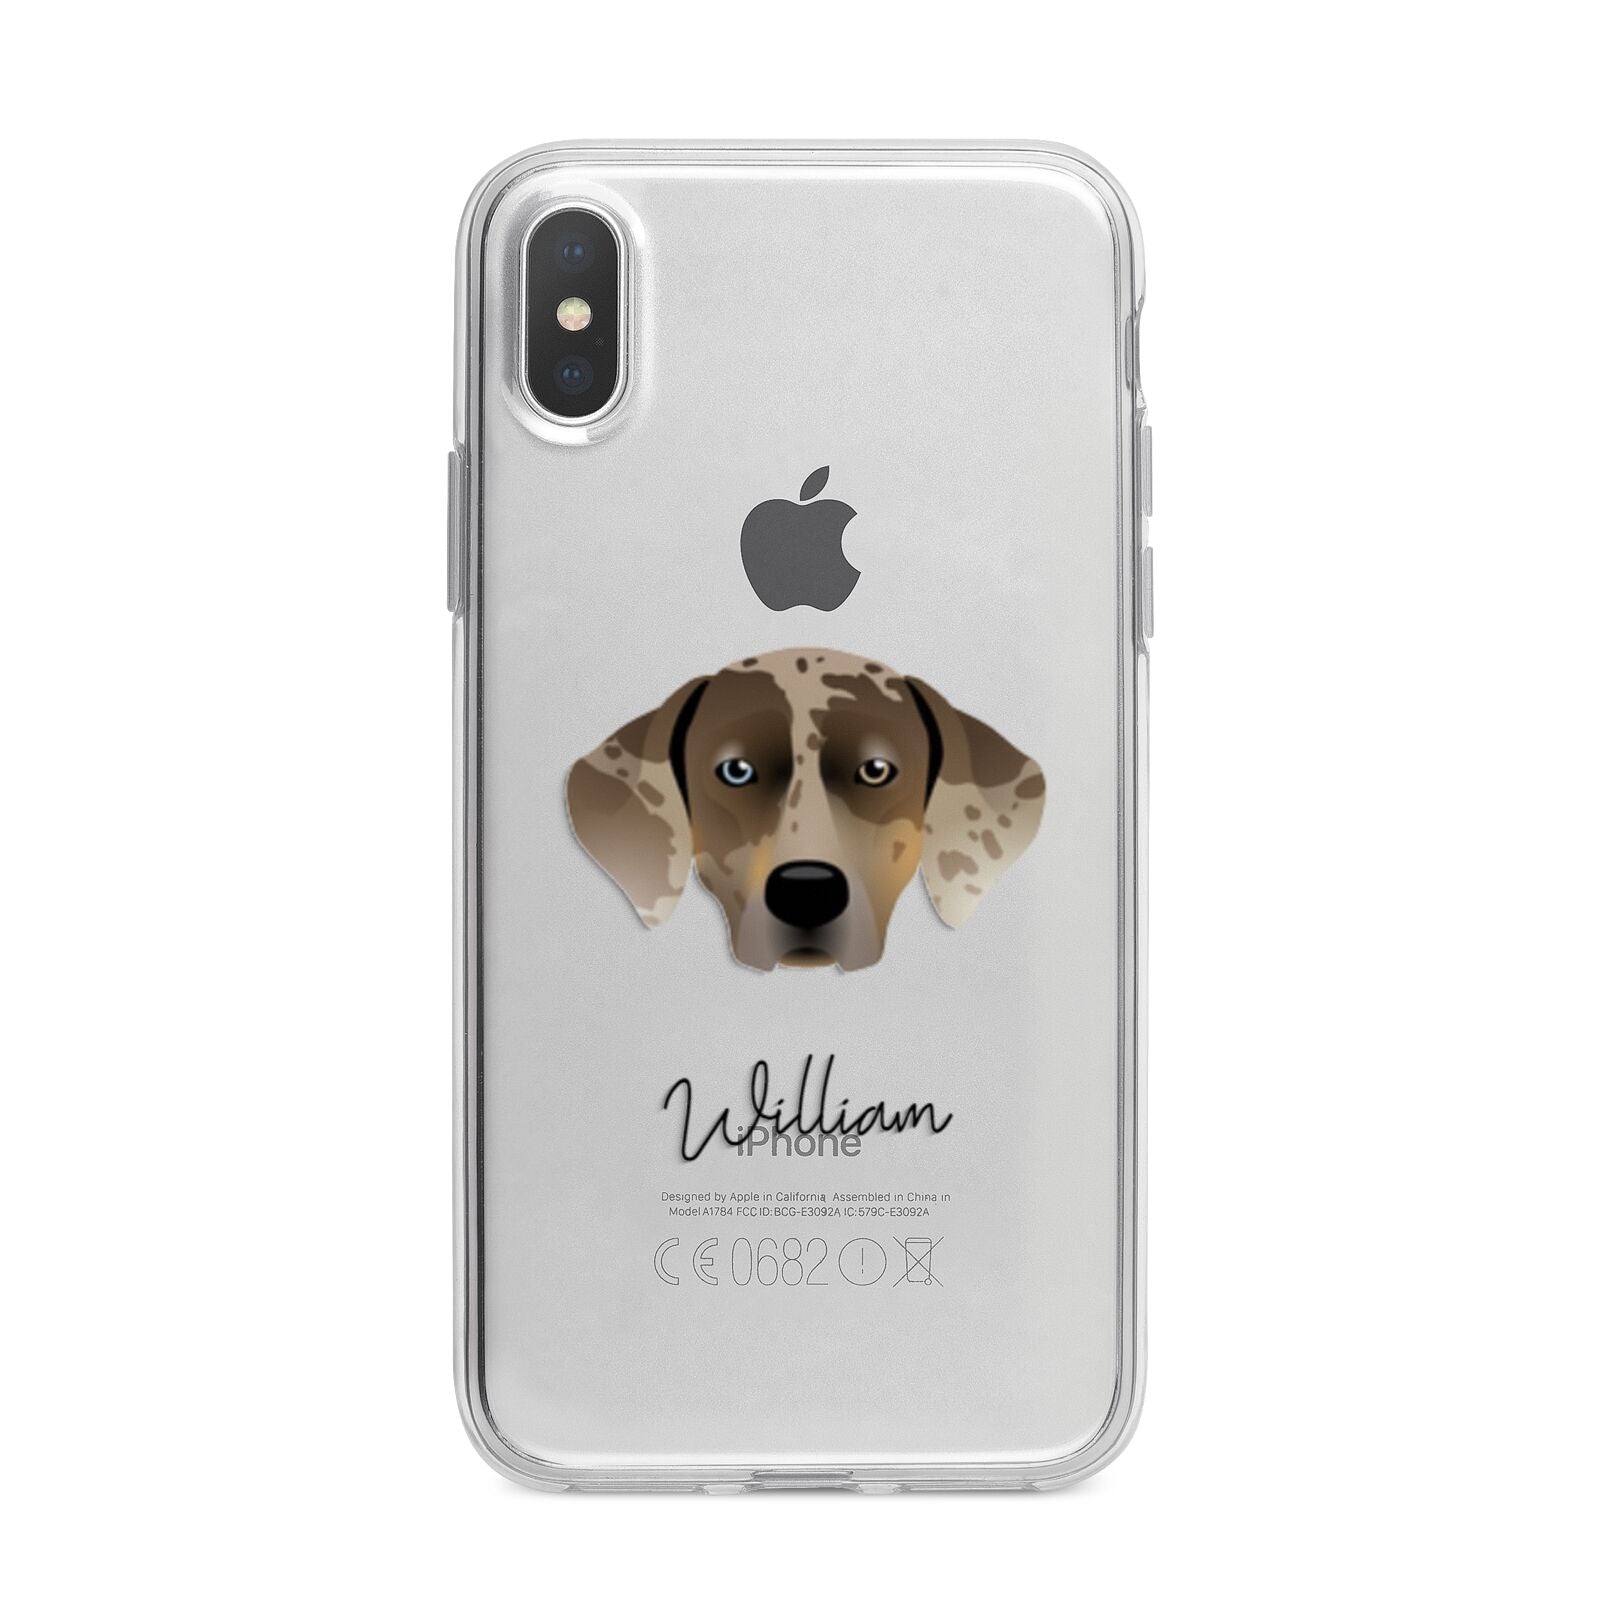 Catahoula Leopard Dog Personalised iPhone X Bumper Case on Silver iPhone Alternative Image 1